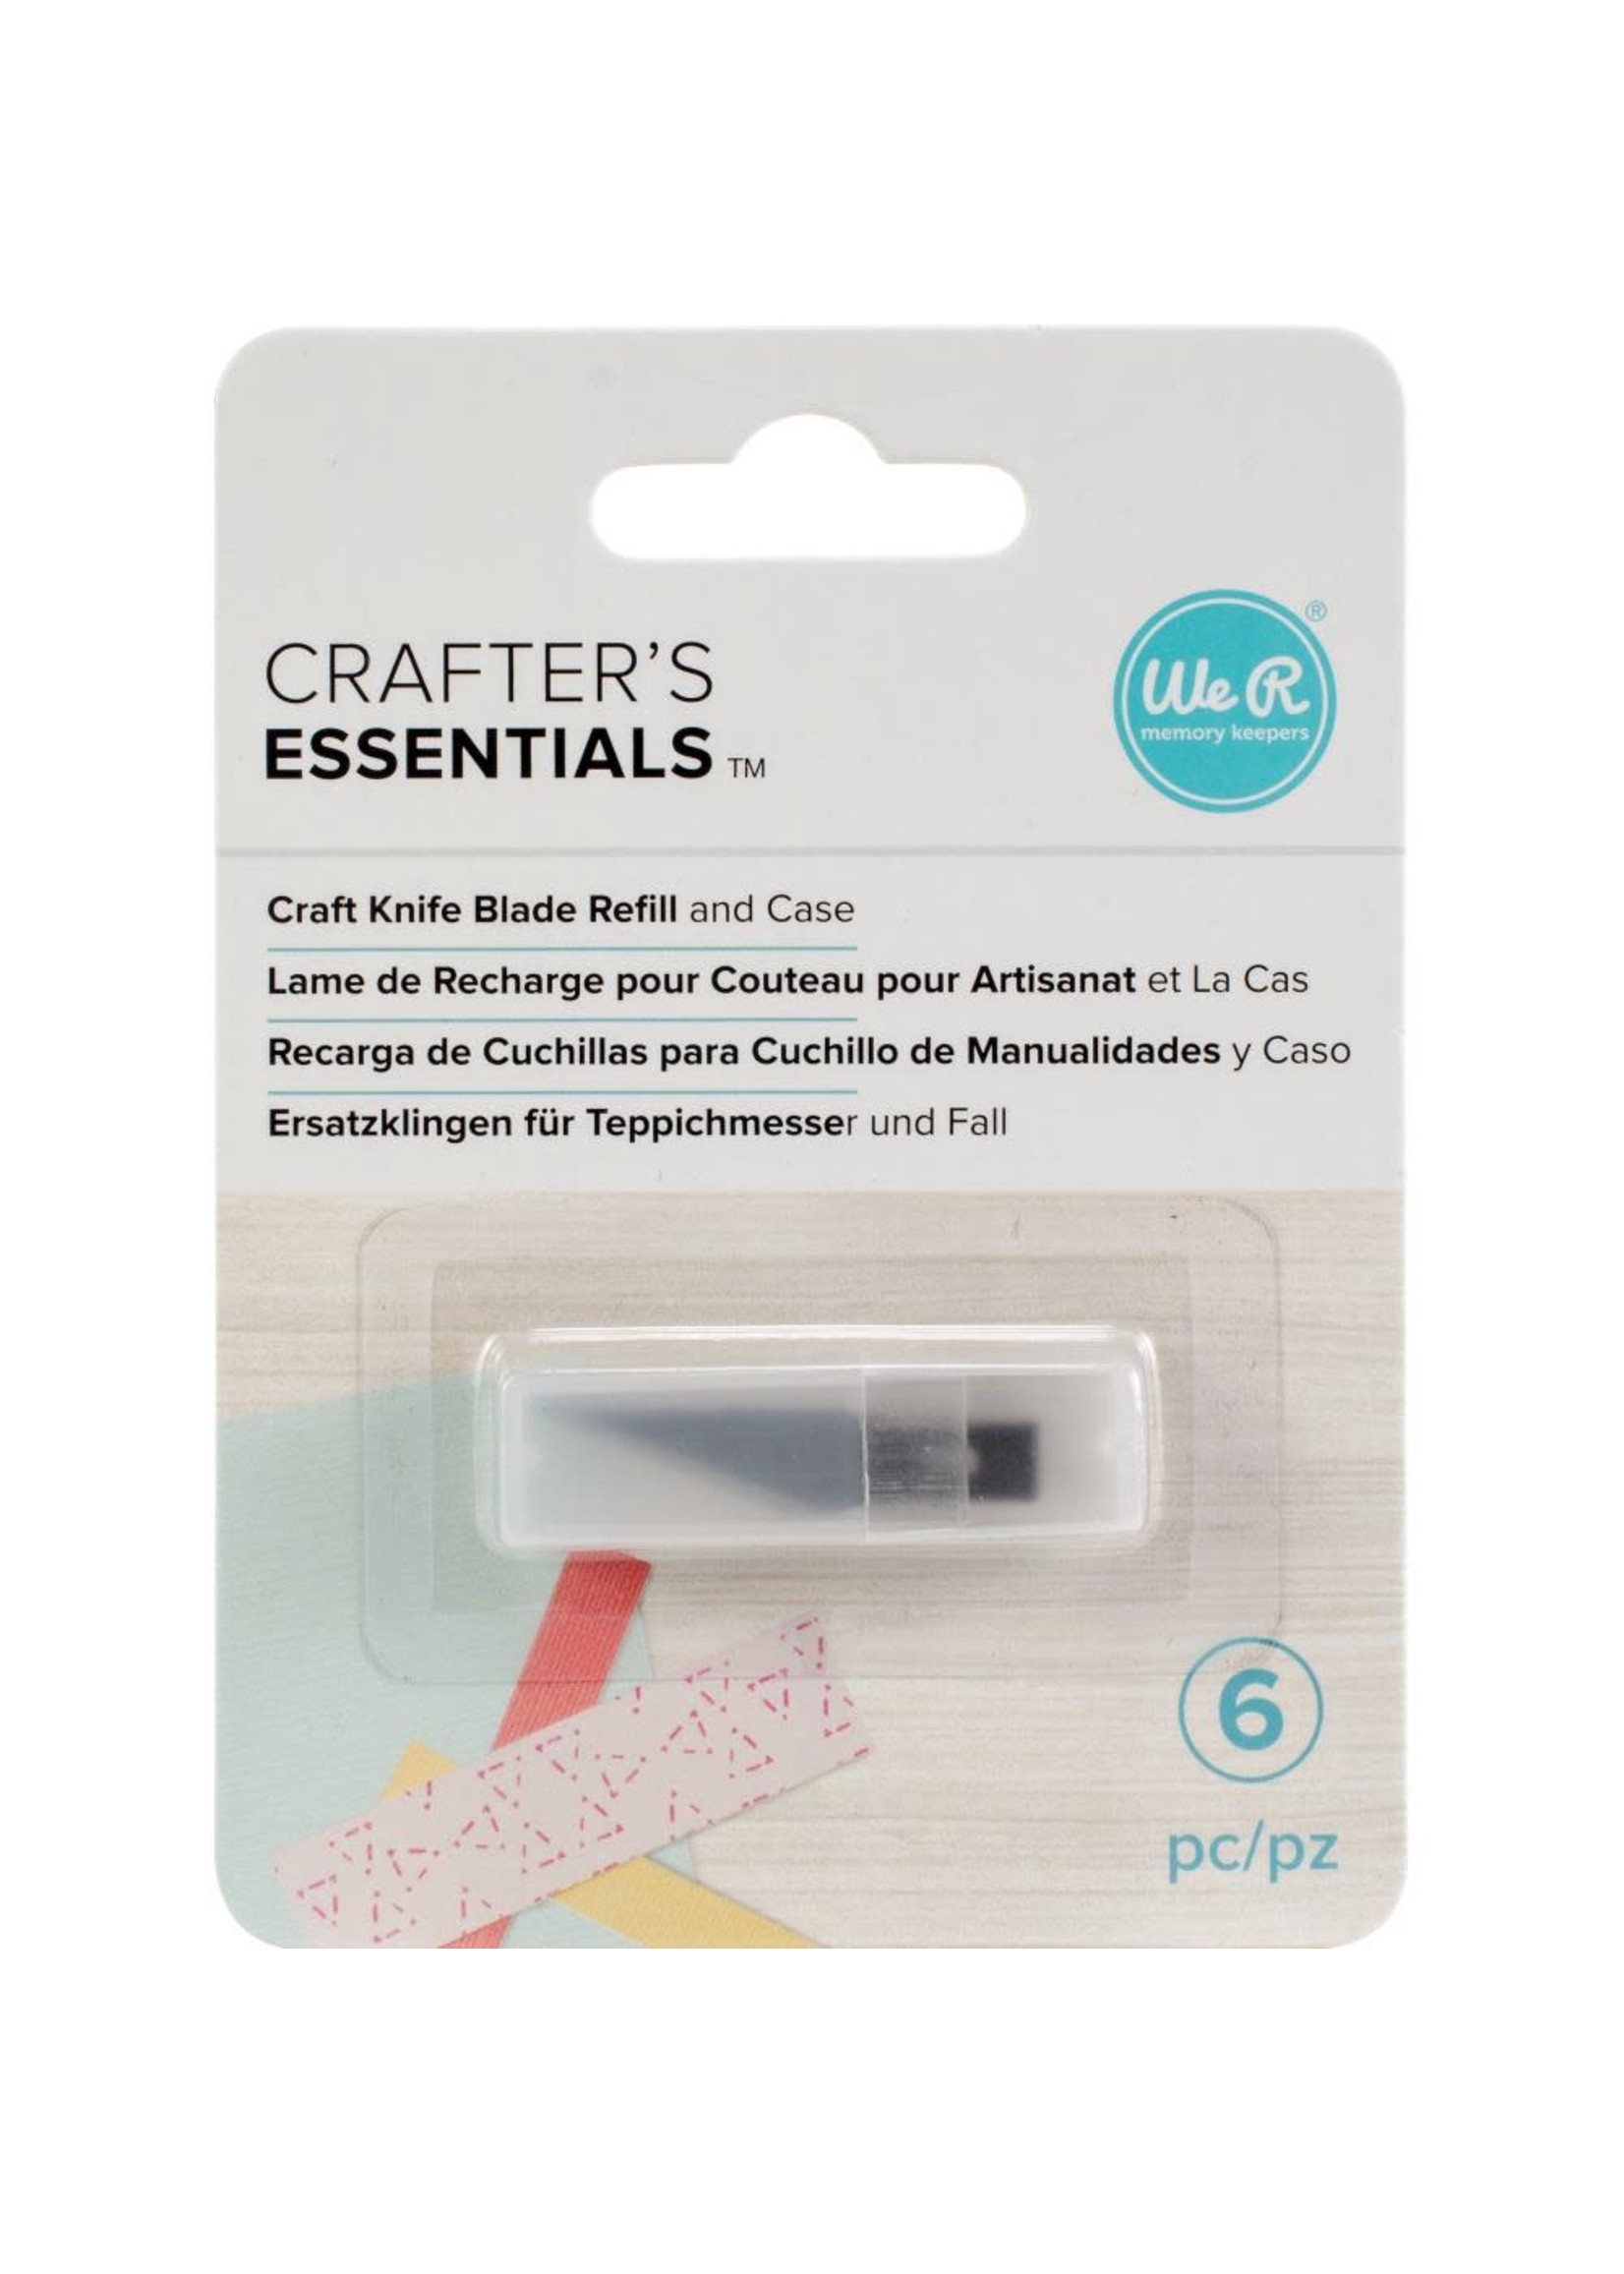 American Crafts / We R Memory Craft Knife Replacement Blades